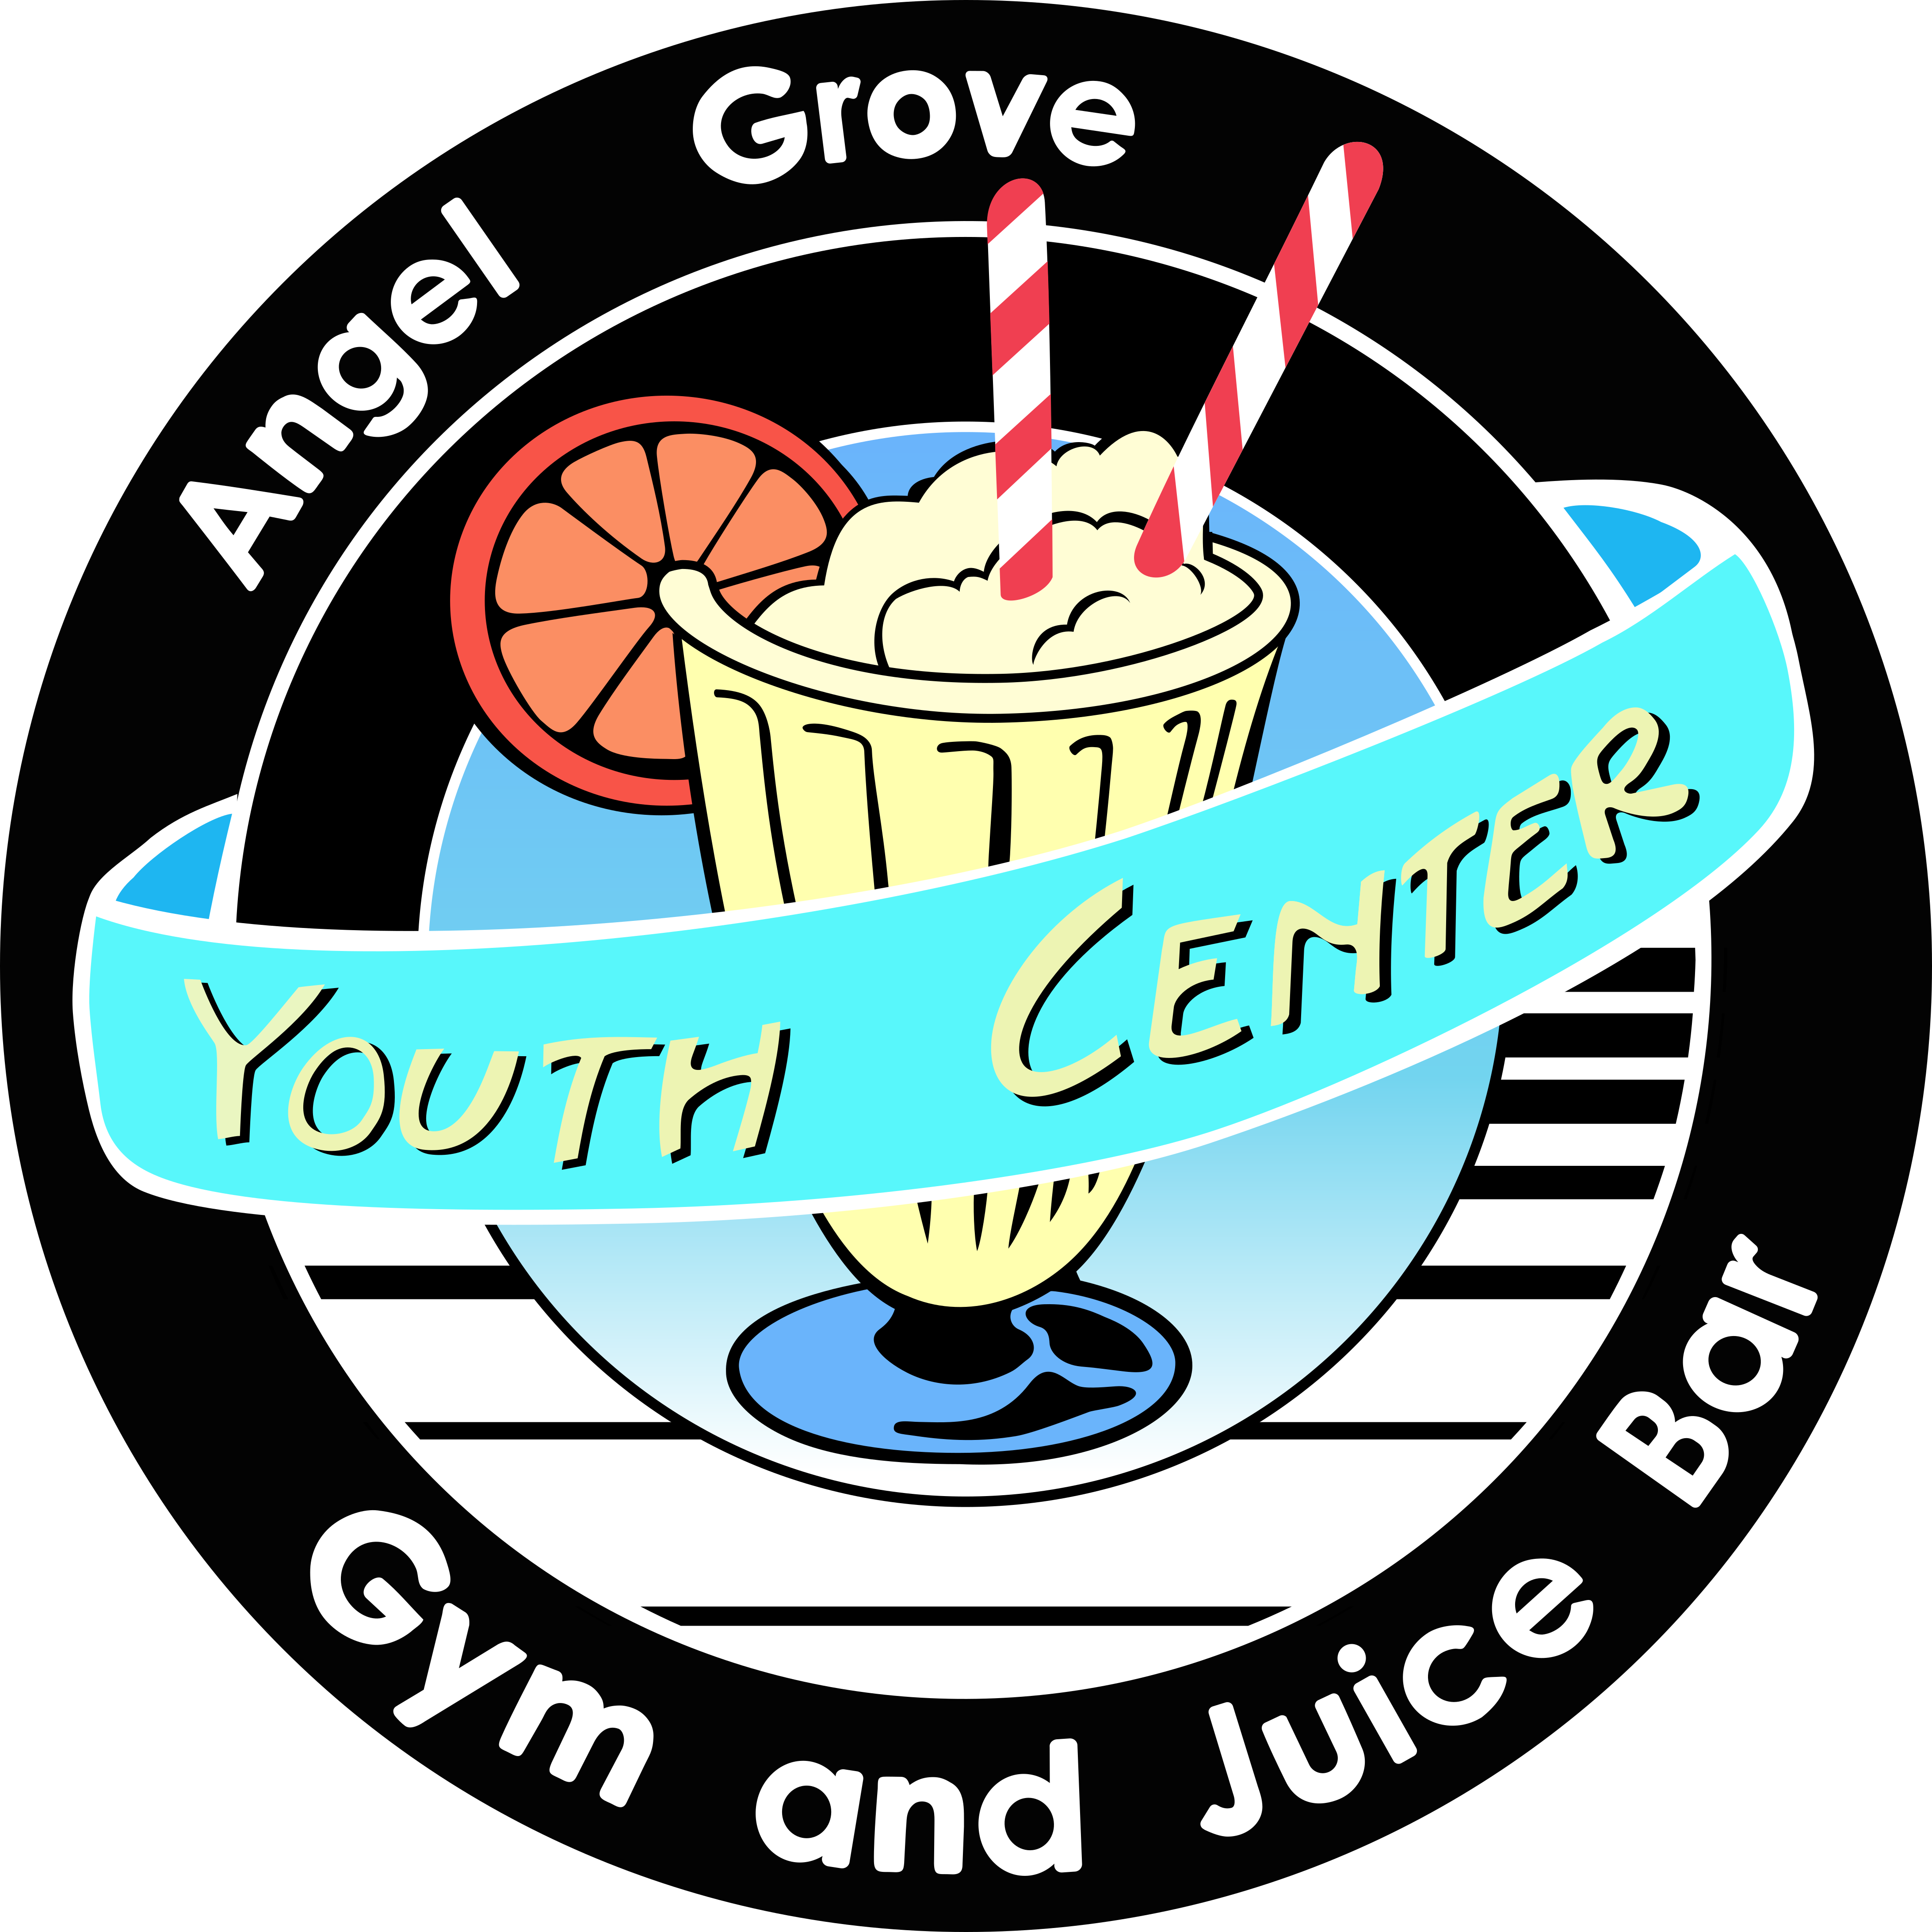 The Gym And Juice Bar Logos I Found On Google Were - Angel Grove Gym And Juice Bar (4370x4370)